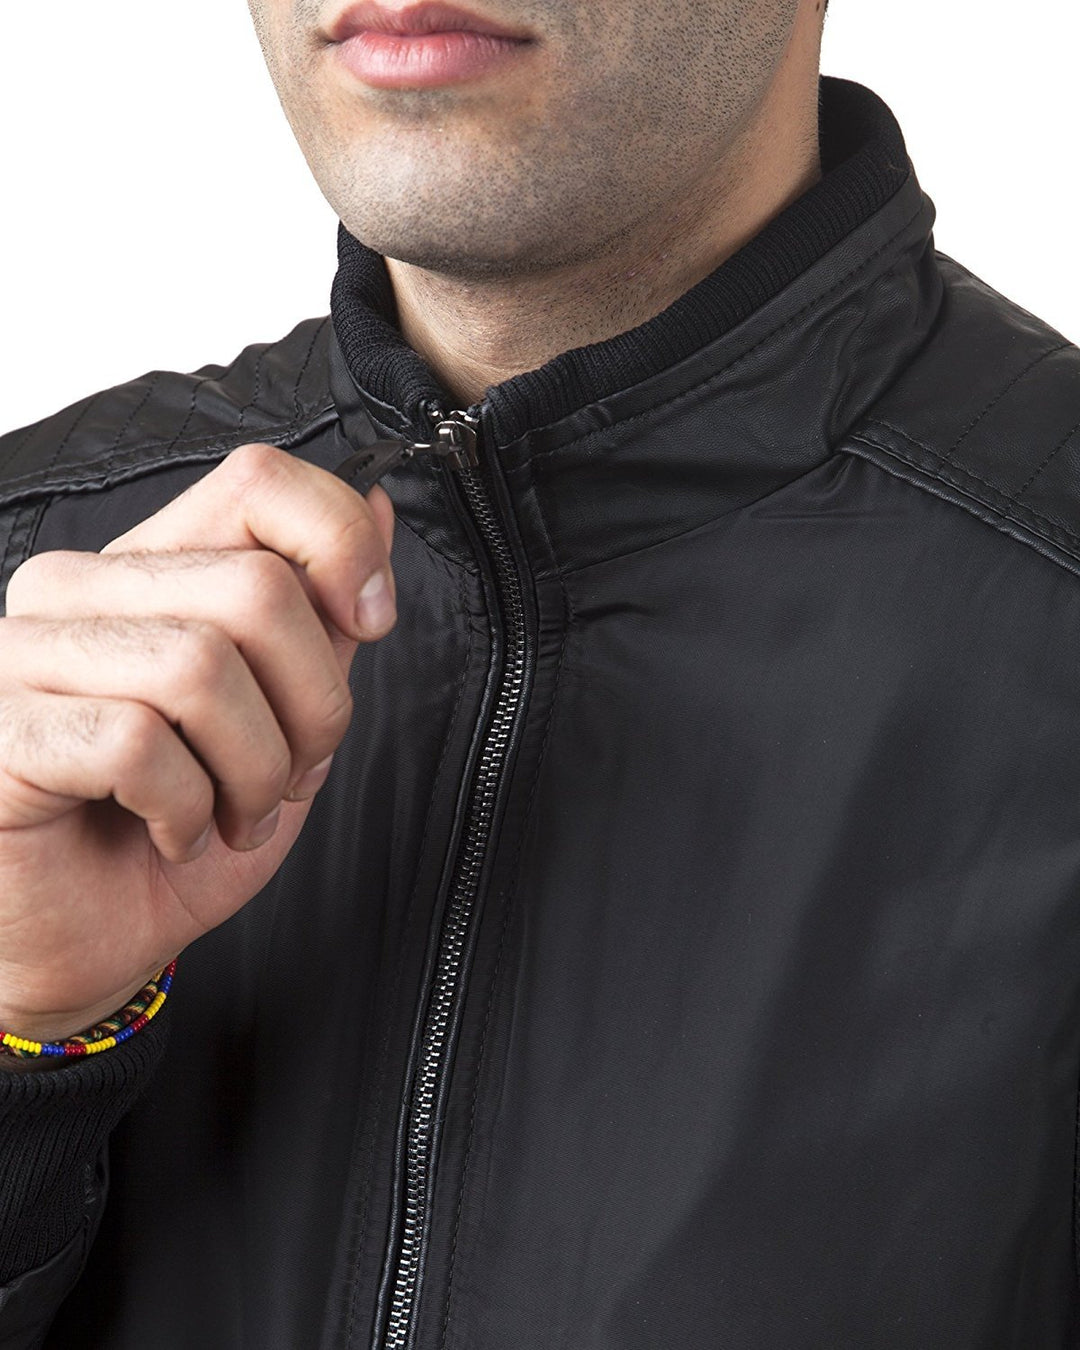 A.K. Collection Men's Faux-Leather Moto Jacket - Available in Many Styles - CLEARANCE - FINAL SALE